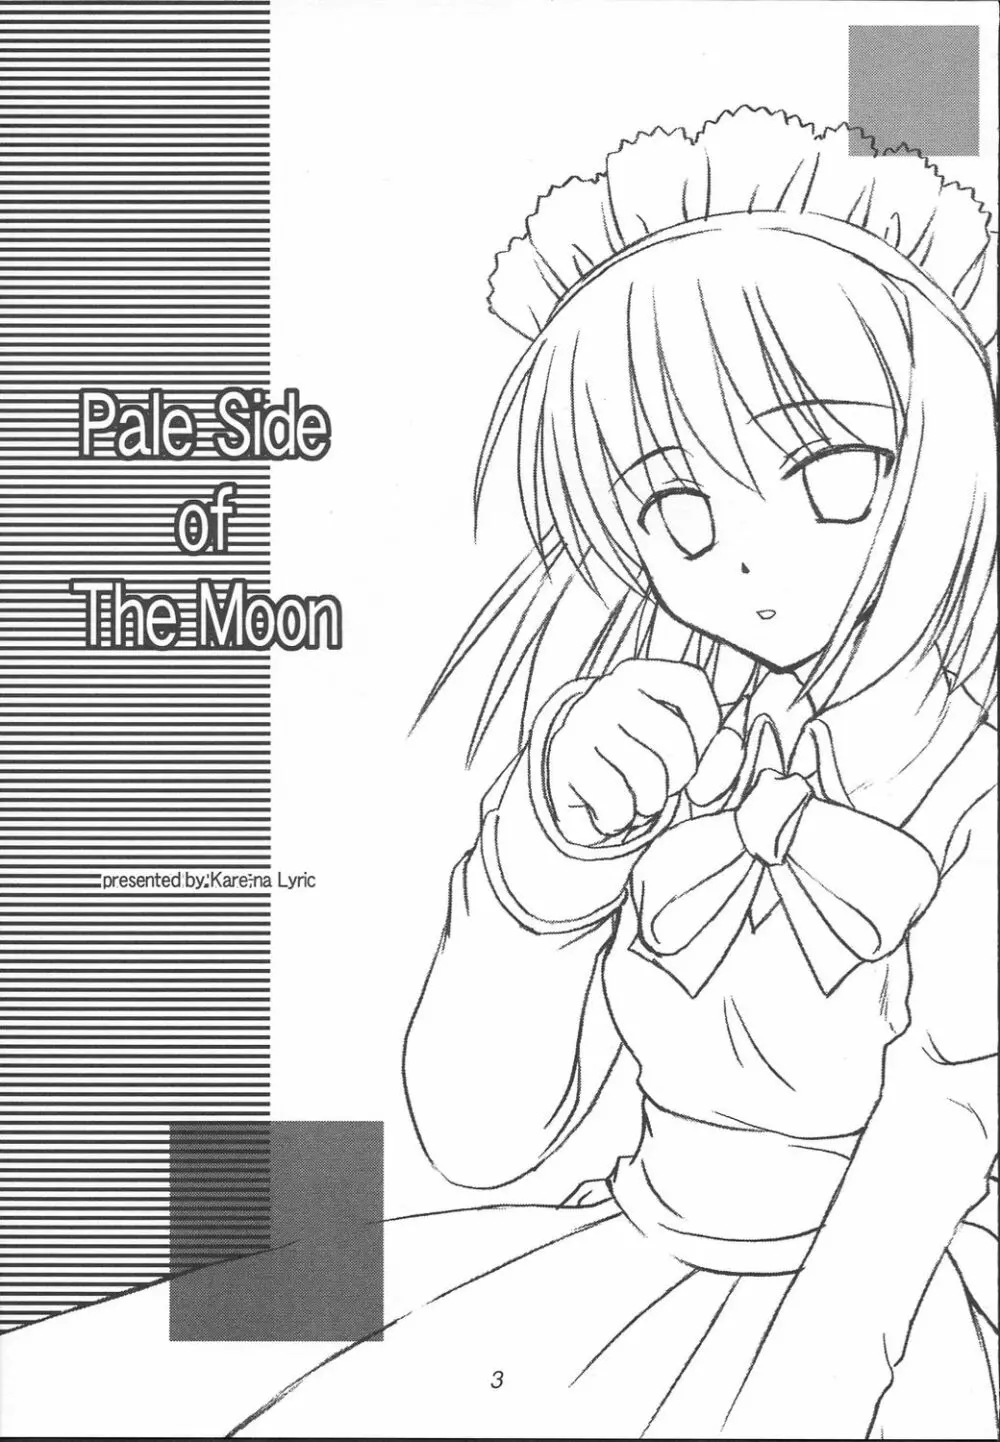 Pale Side of The Moon 2ページ